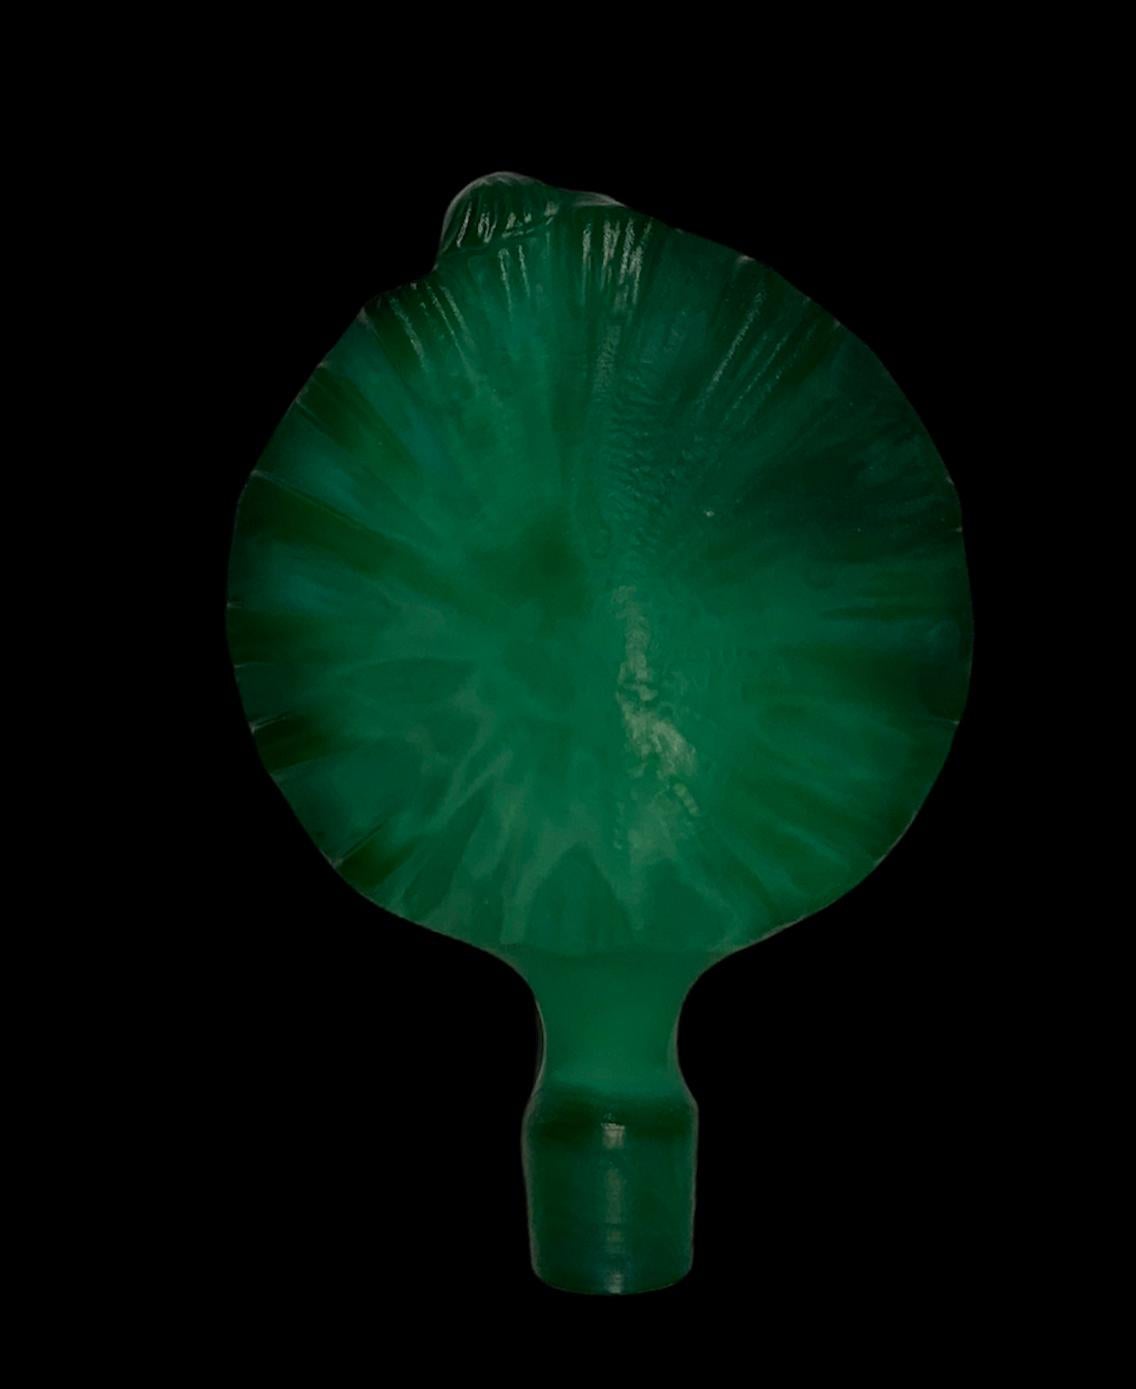 This is a malachite asymmetrical faceted perfume bottle. The stopper of the bottle is depicting a nude lady in kneeling position against a seashell holding a pearl necklace behind her back.